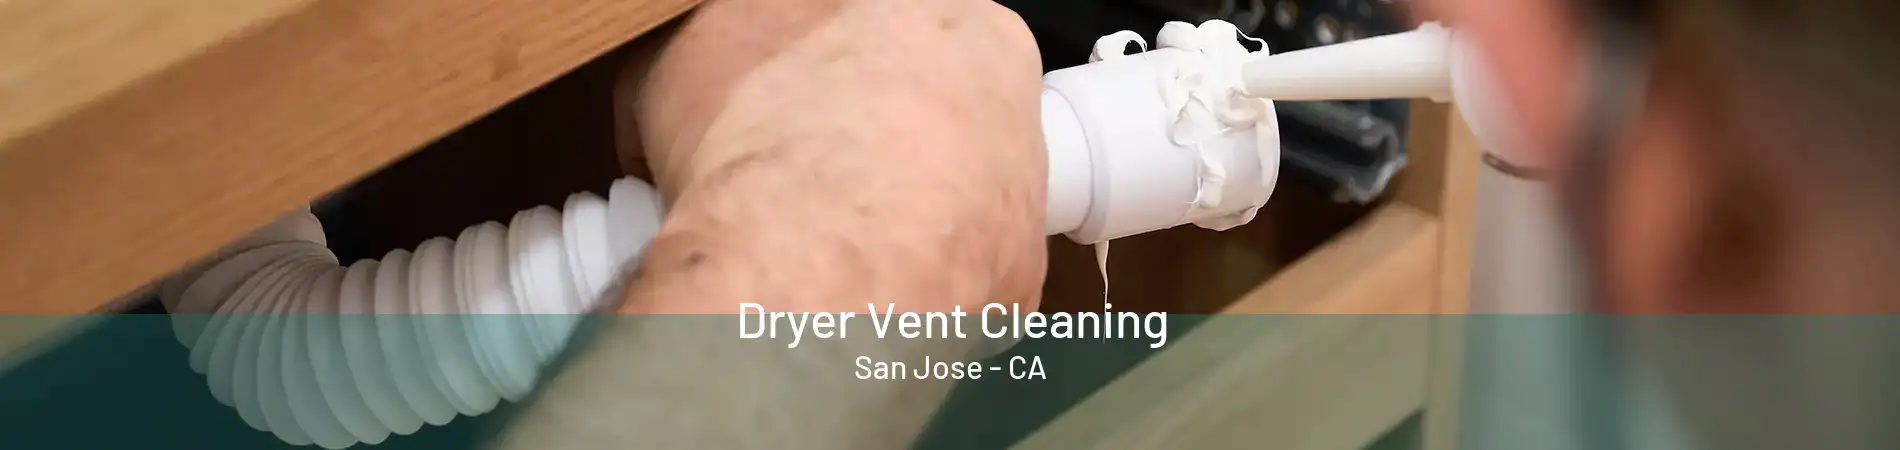 Dryer Vent Cleaning San Jose - CA